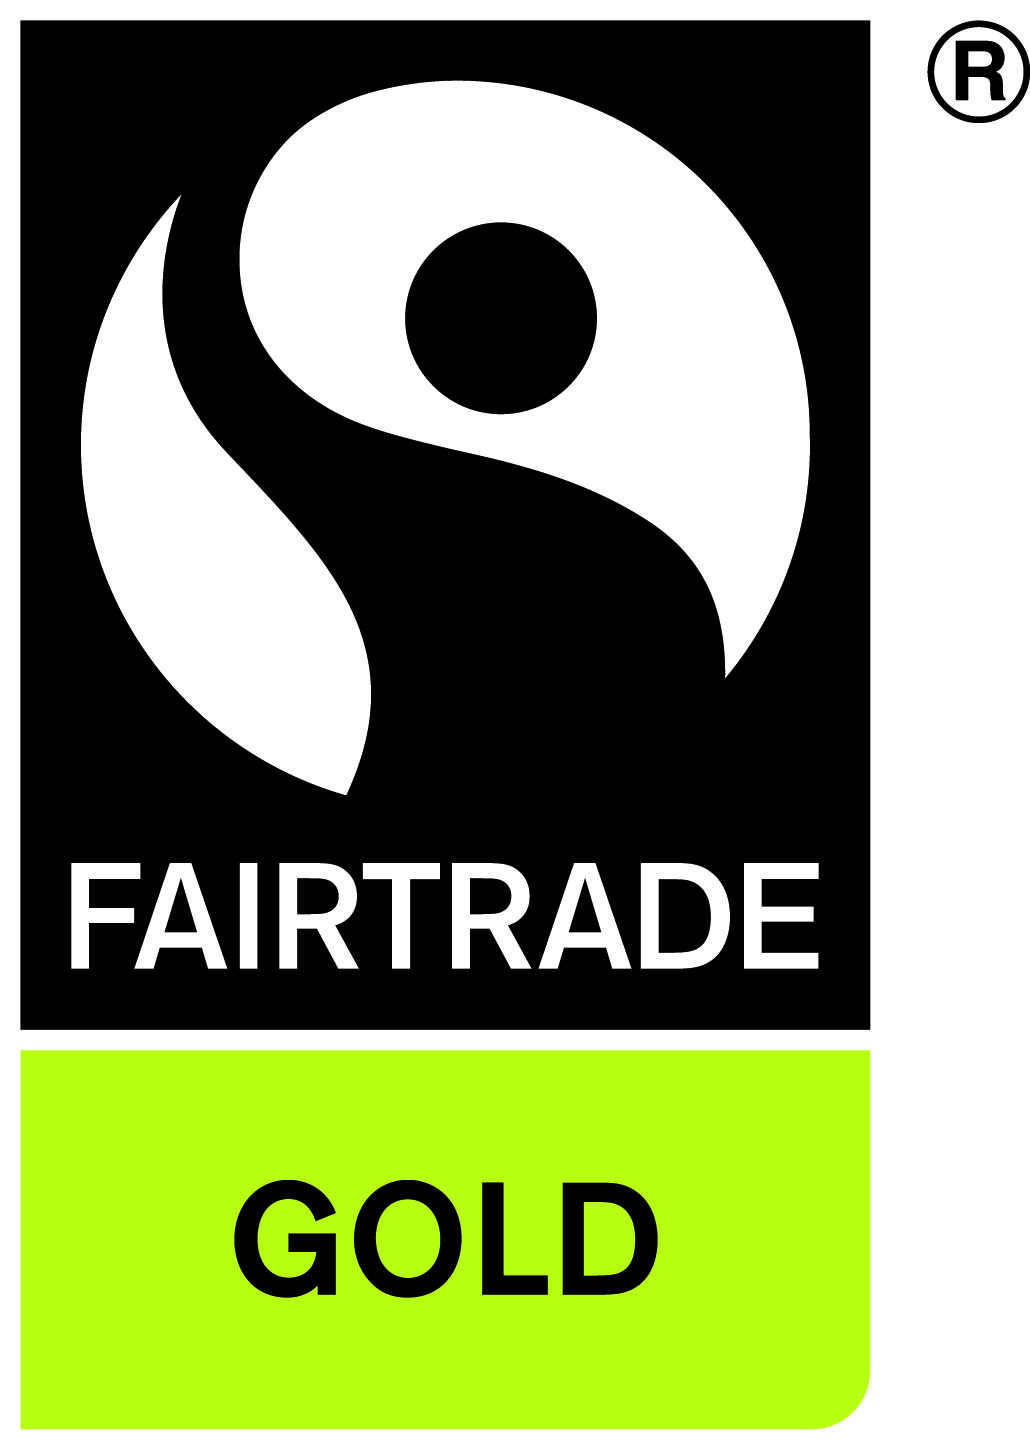 Fairtrade Gold is a proven system that provides vast benefit to both small-scale miners and the environment.